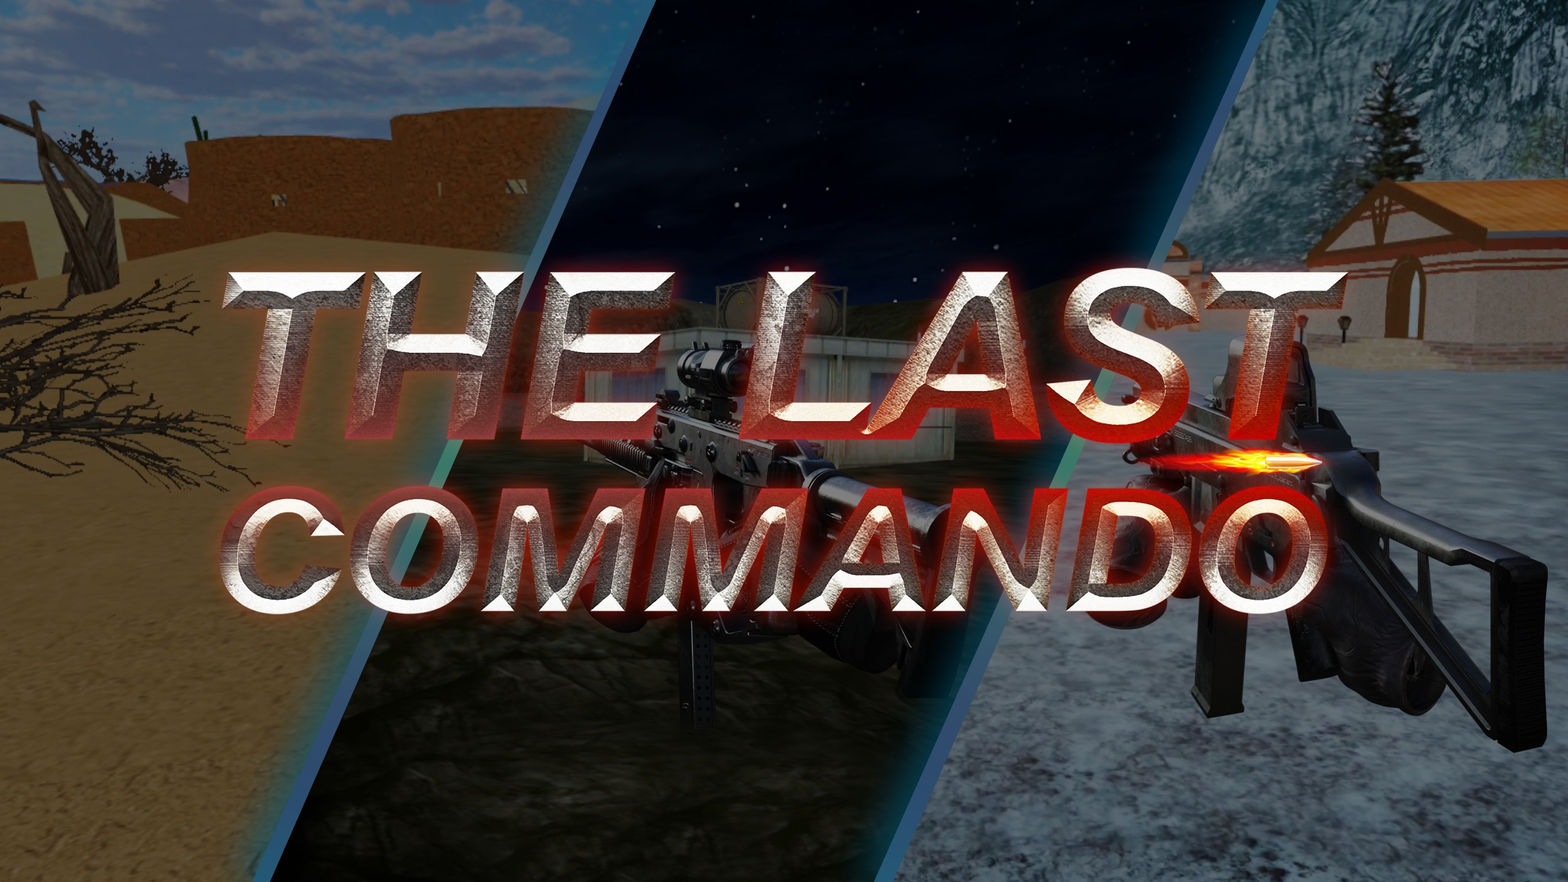 The Last Commando - Shooting Game & Action Game